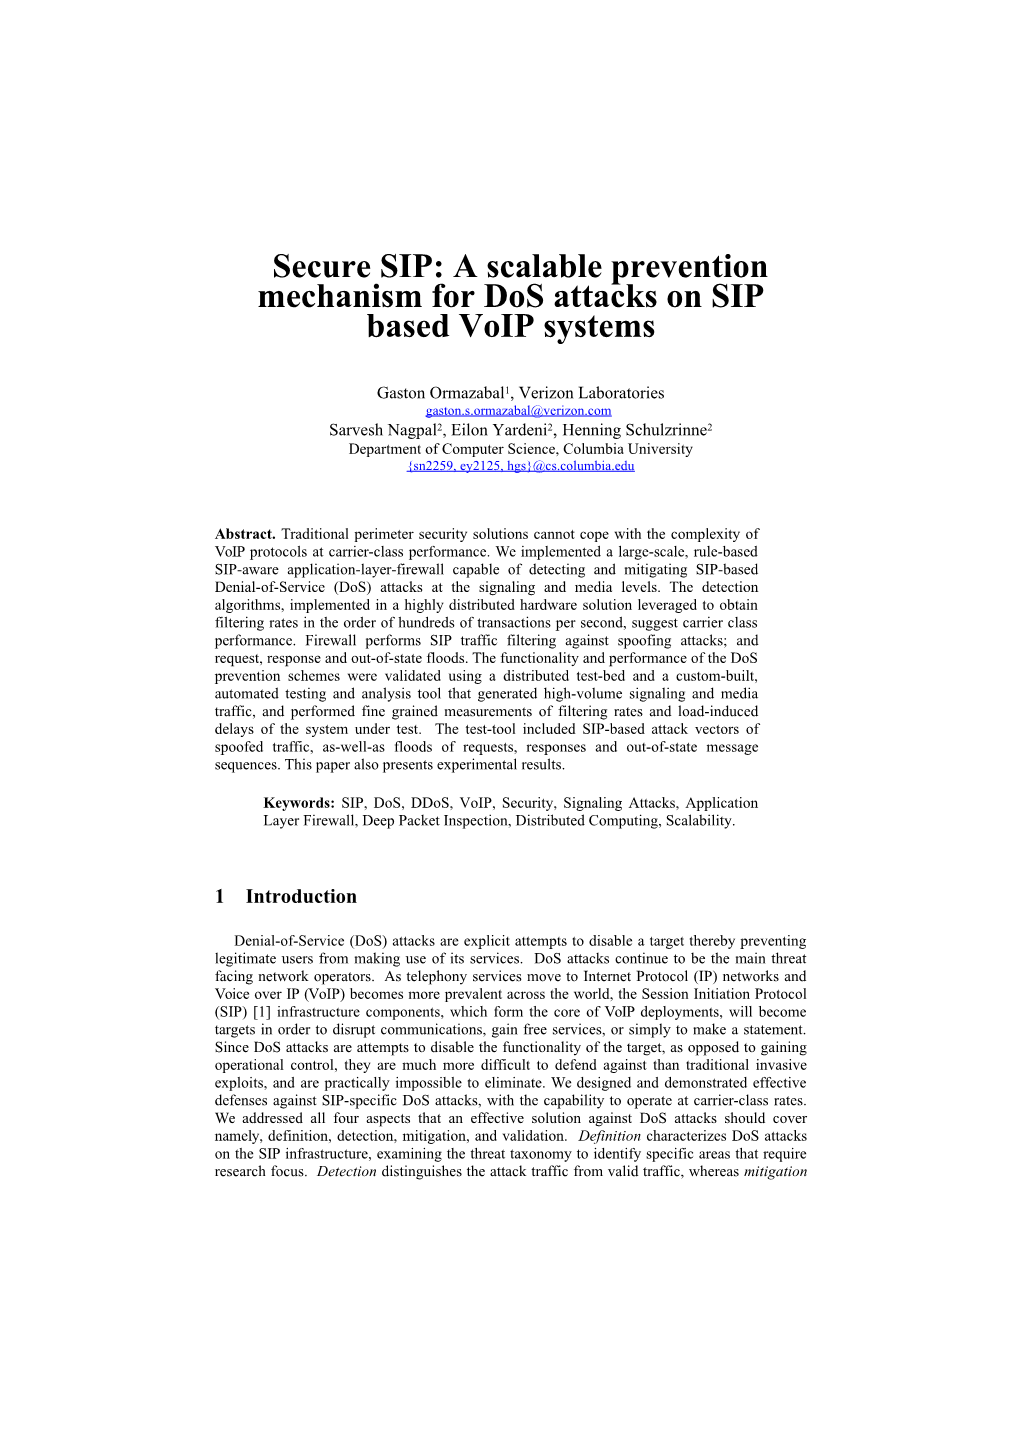 Secure SIP: a Scalable Prevention Mechanism for Dos Attacks on SIP Based Voip Systems